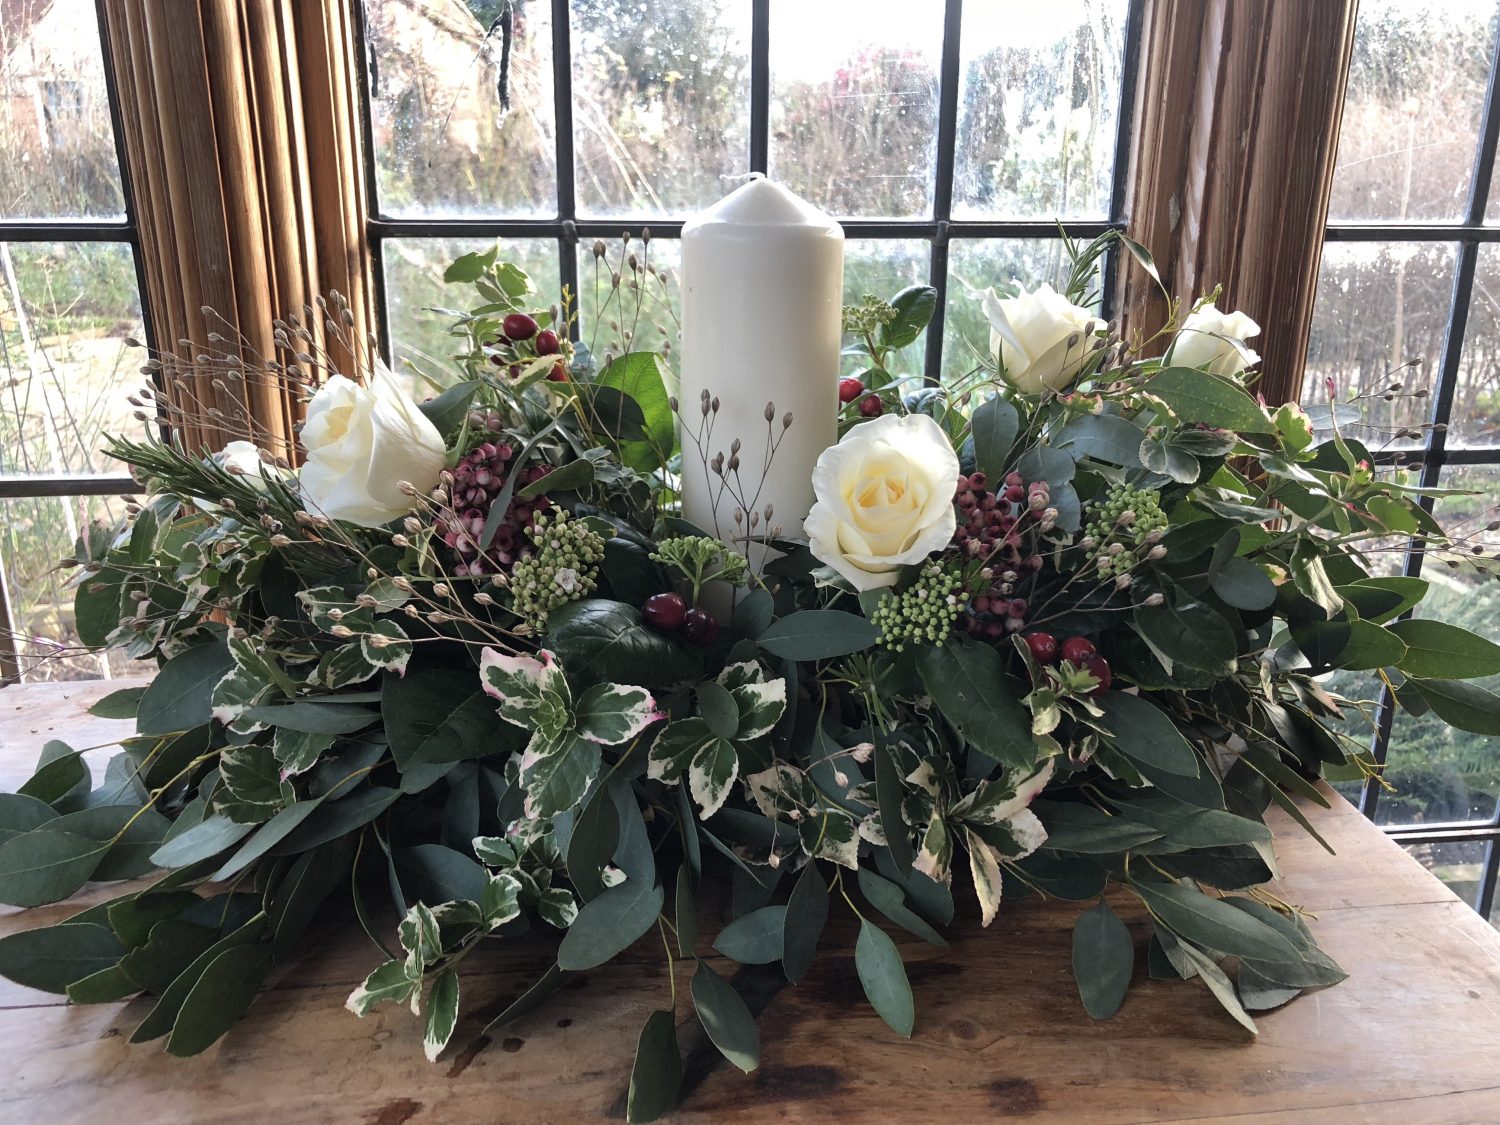 Table decoration using shop bought roses and foliage from the garden